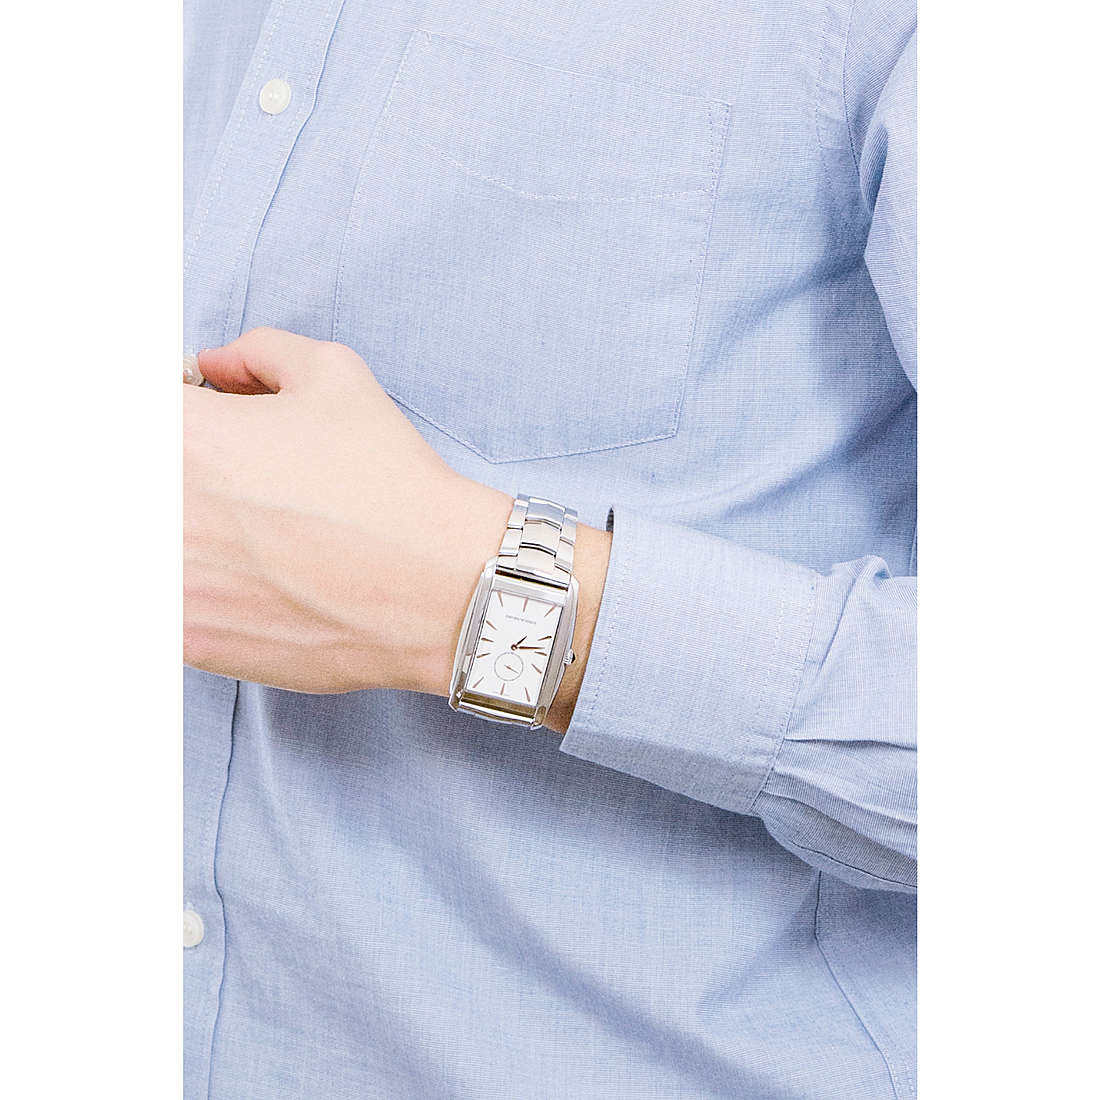 Emporio Armani Swiss only time man ARS8354 wearing